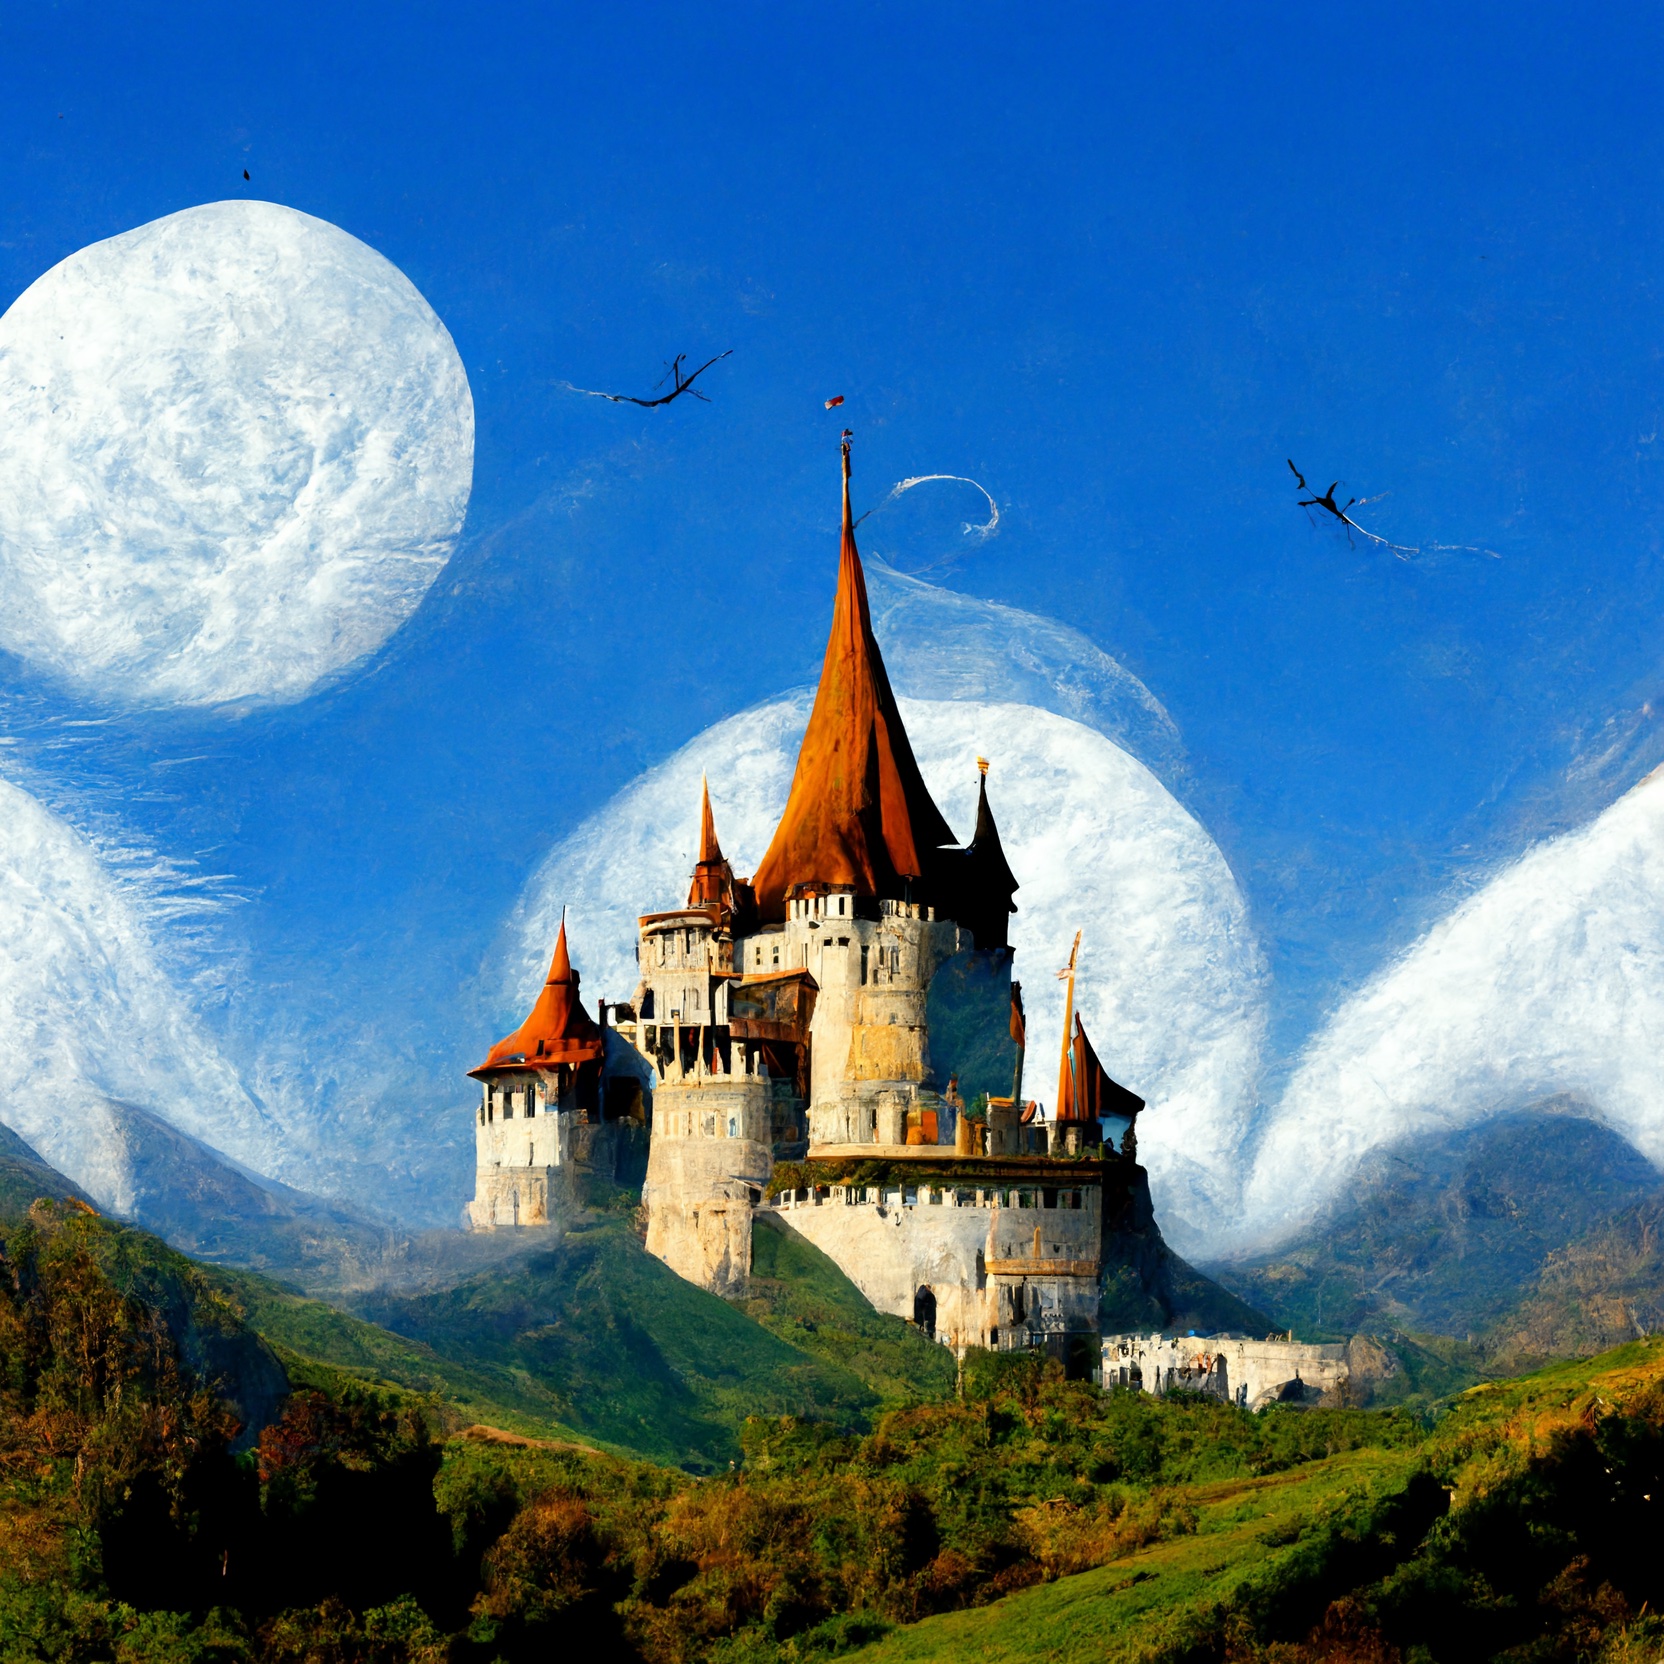 Majestic fantasy castle circled by dragons there are mo 8515c4b9 12f0 439b 9e75 fba8193209f5